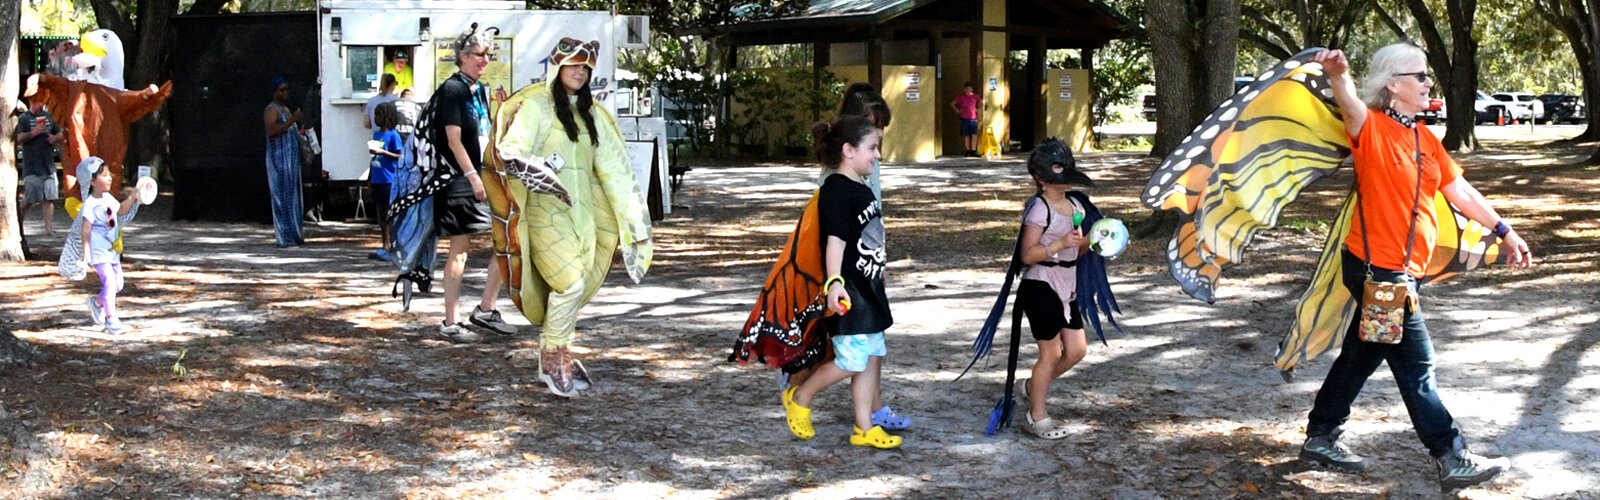 A small but fun animal costume parade is led by Nancy Murrah, the president of the Raptor Center of Tampa Bay, the organization that presents the annual Wonders of Wildlife Festival in Plant City.